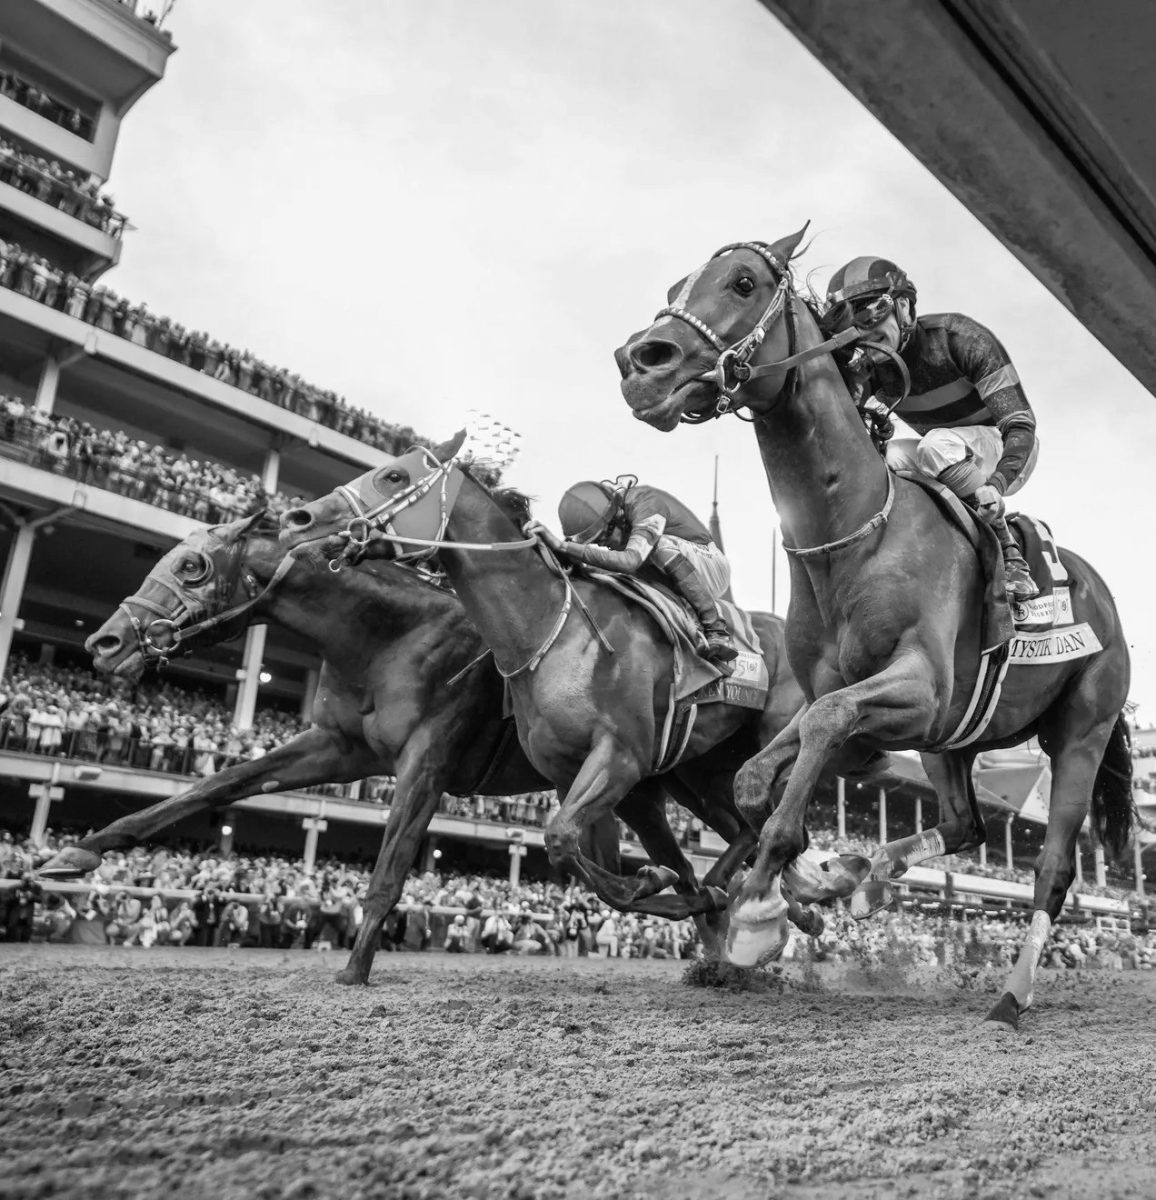 Review Editor Revisits Kentucky Derby Roots